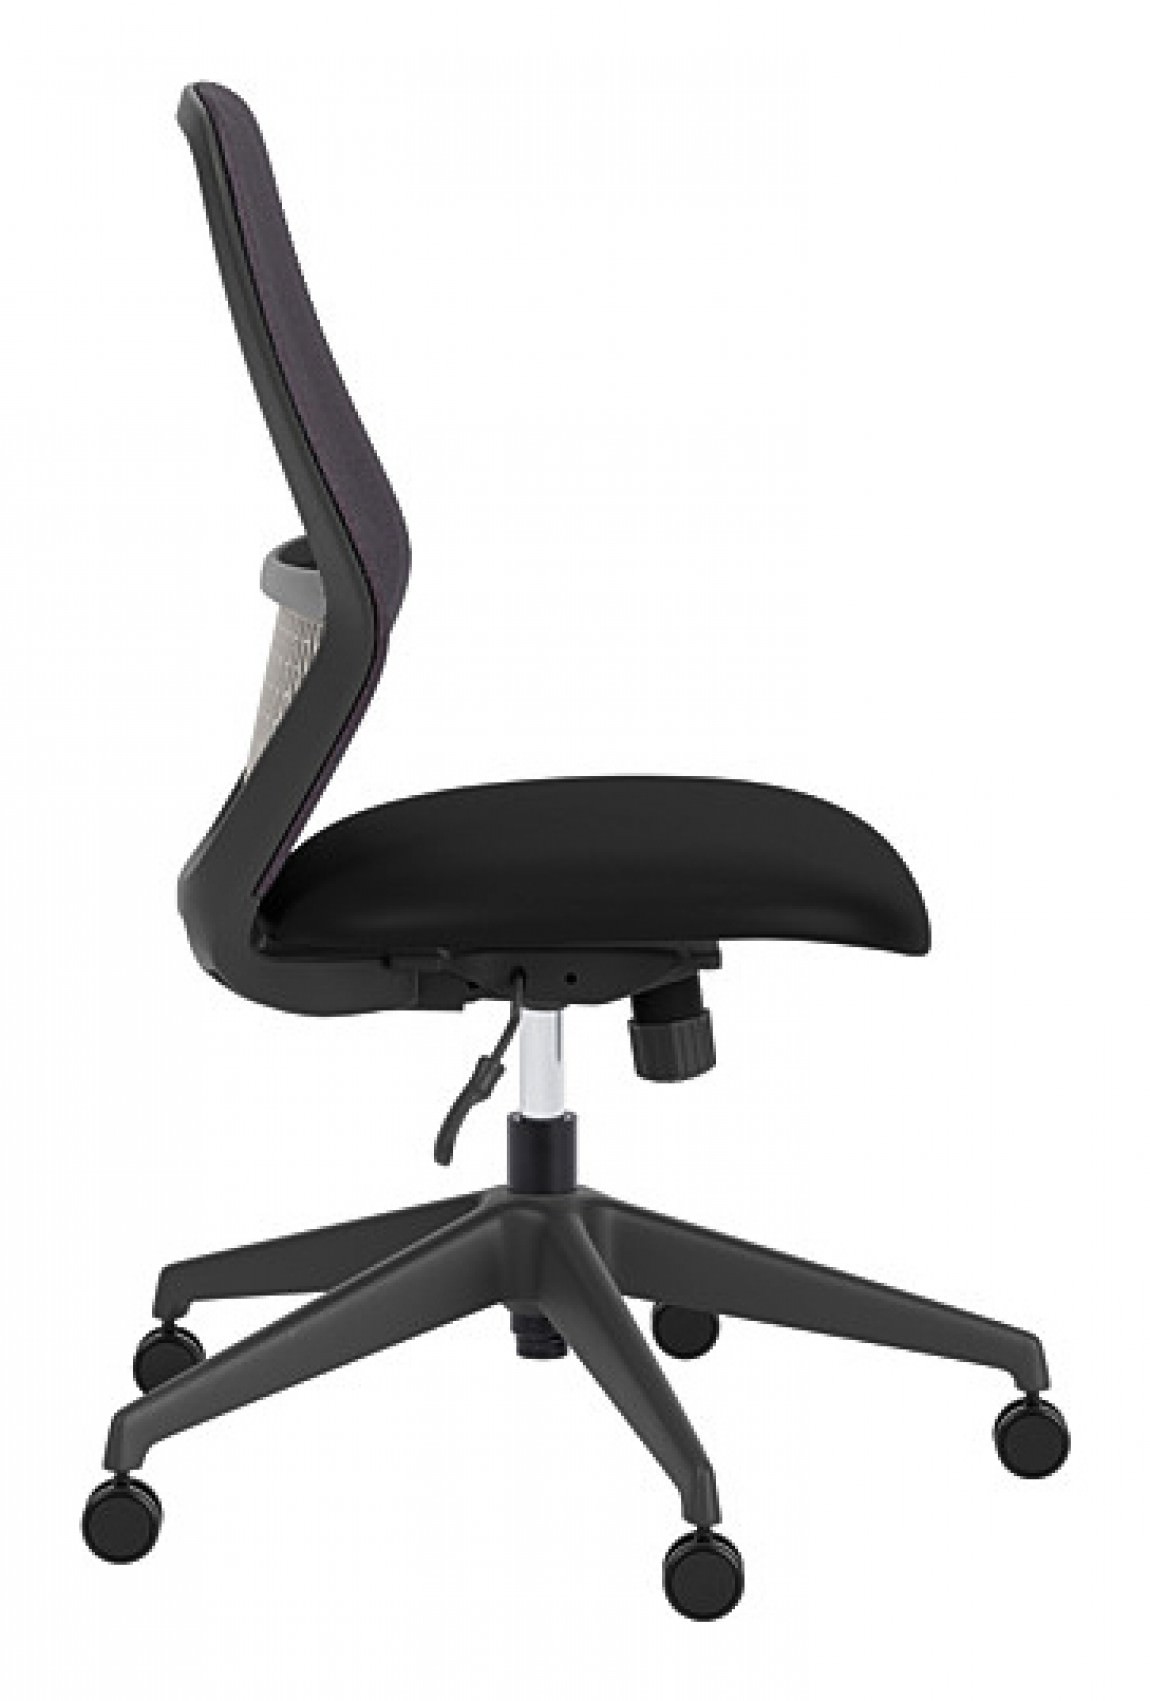 https://madisonliquidators.com/images/p/1150/28635-mid-back-task-chair-without-arms-2.jpg